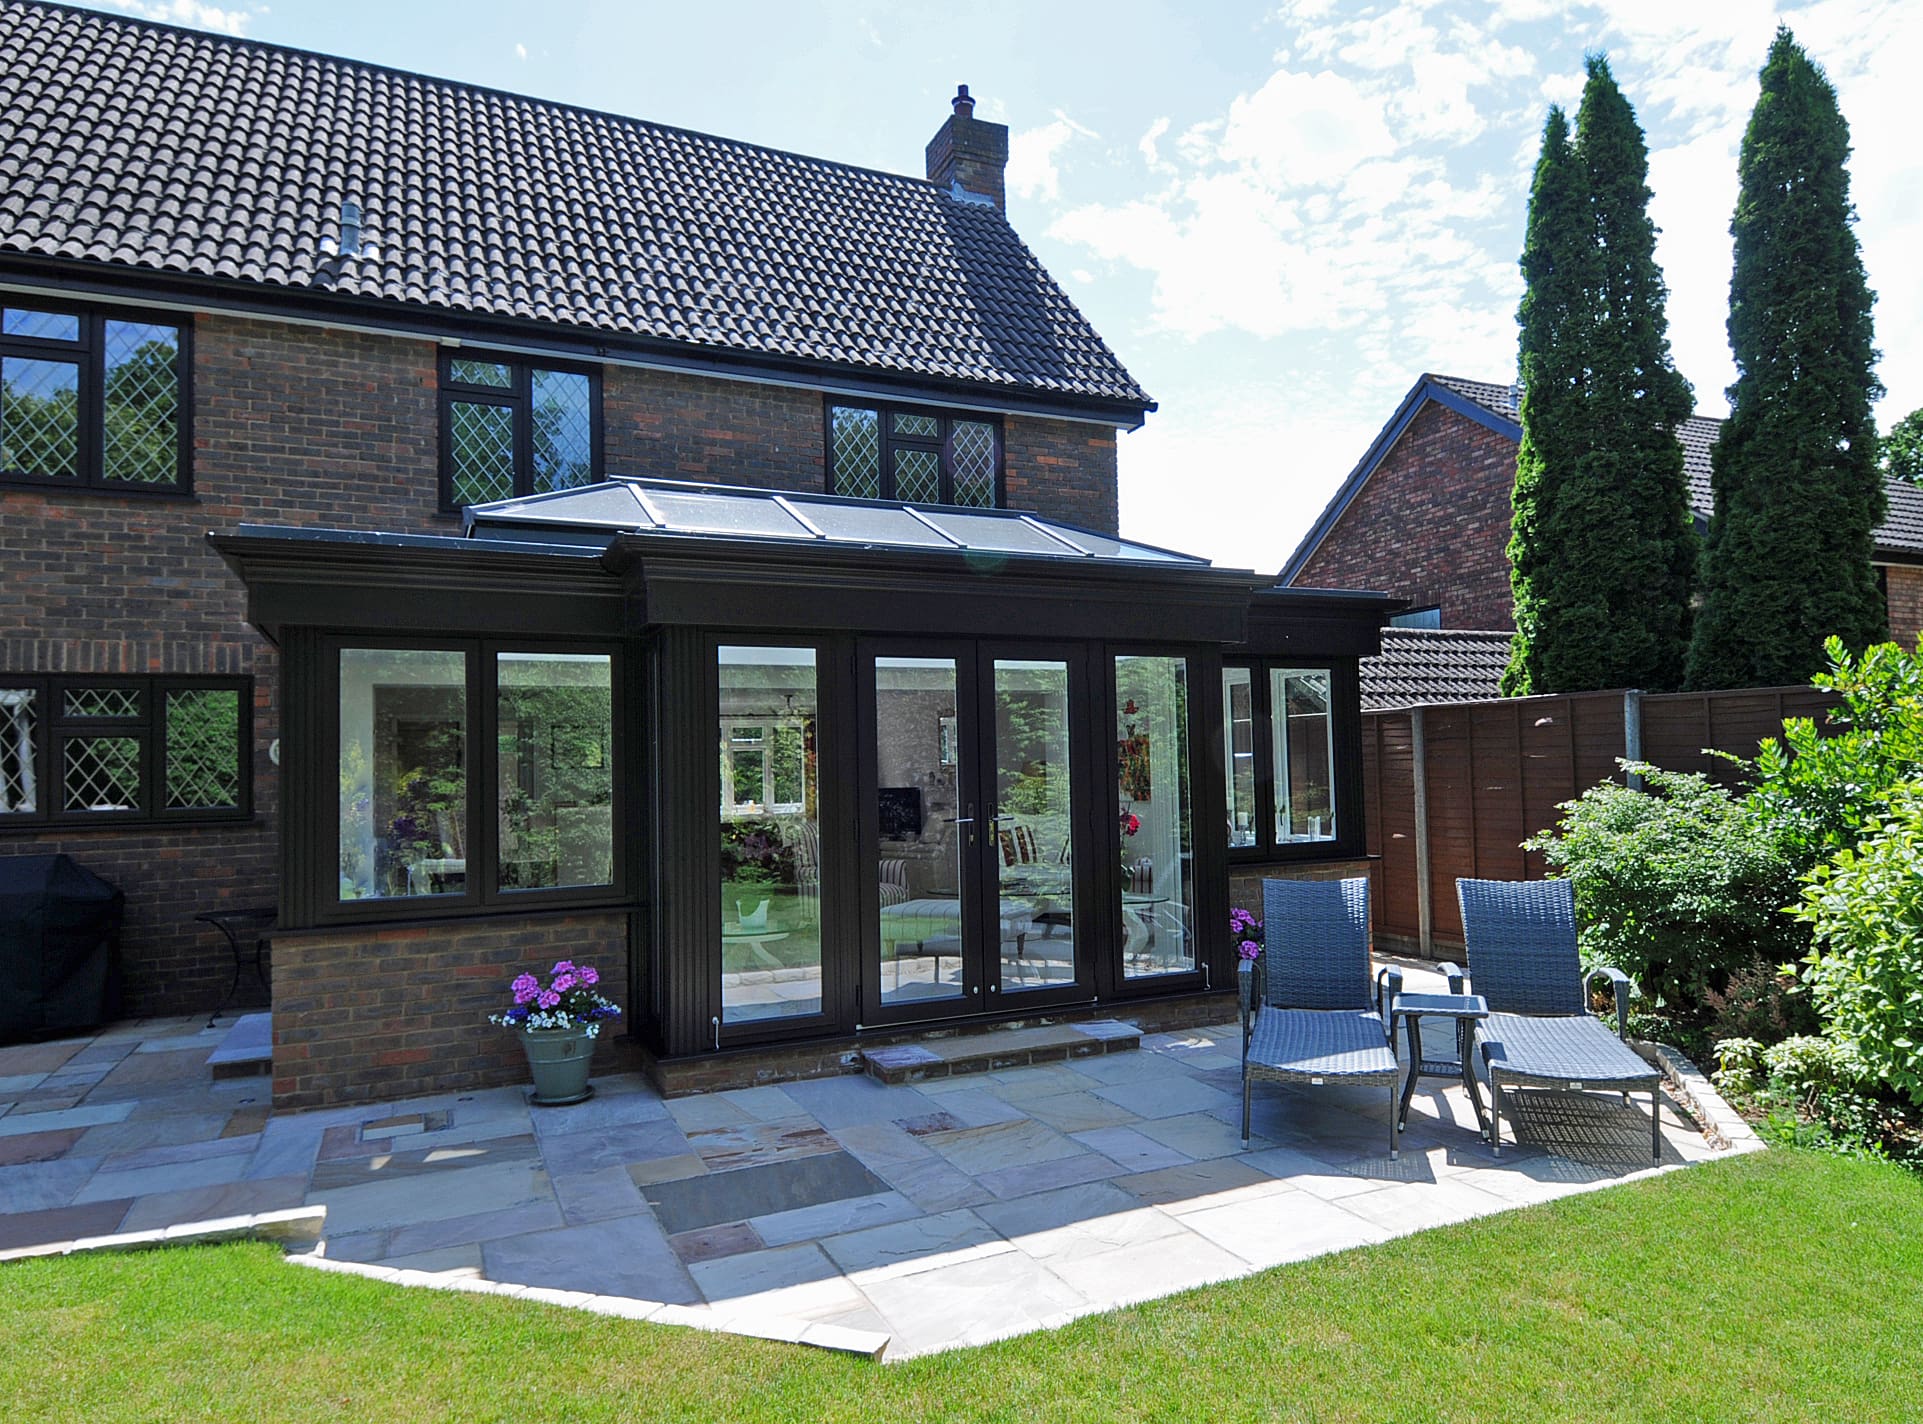 Exterior view of a kitchen extension featuring bespoke glazing with black frames.